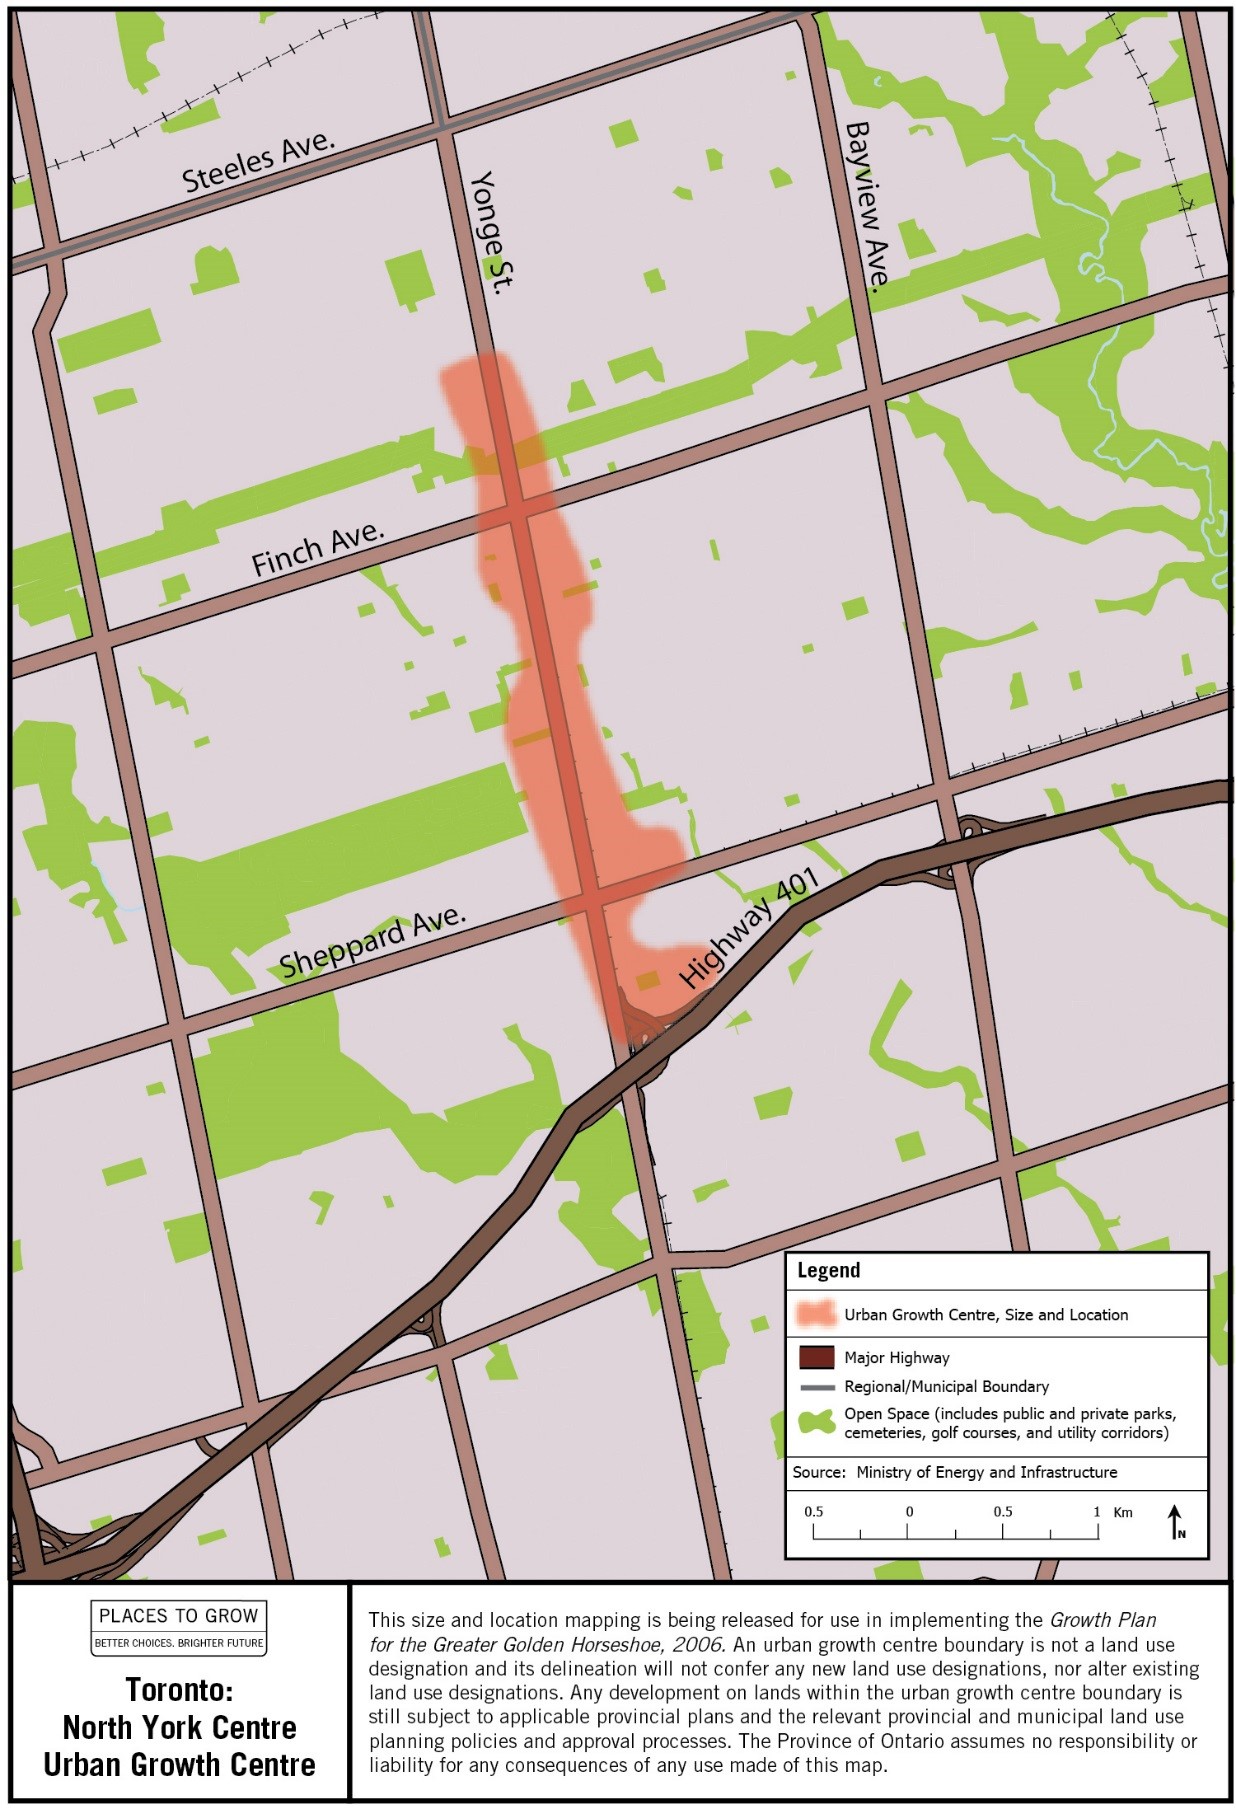 Image description: Map of the approximate size and location of the Toronto: North York Centre Urban Growth Centre in the vicinity of Sheppard Avenue and Yonge Street.